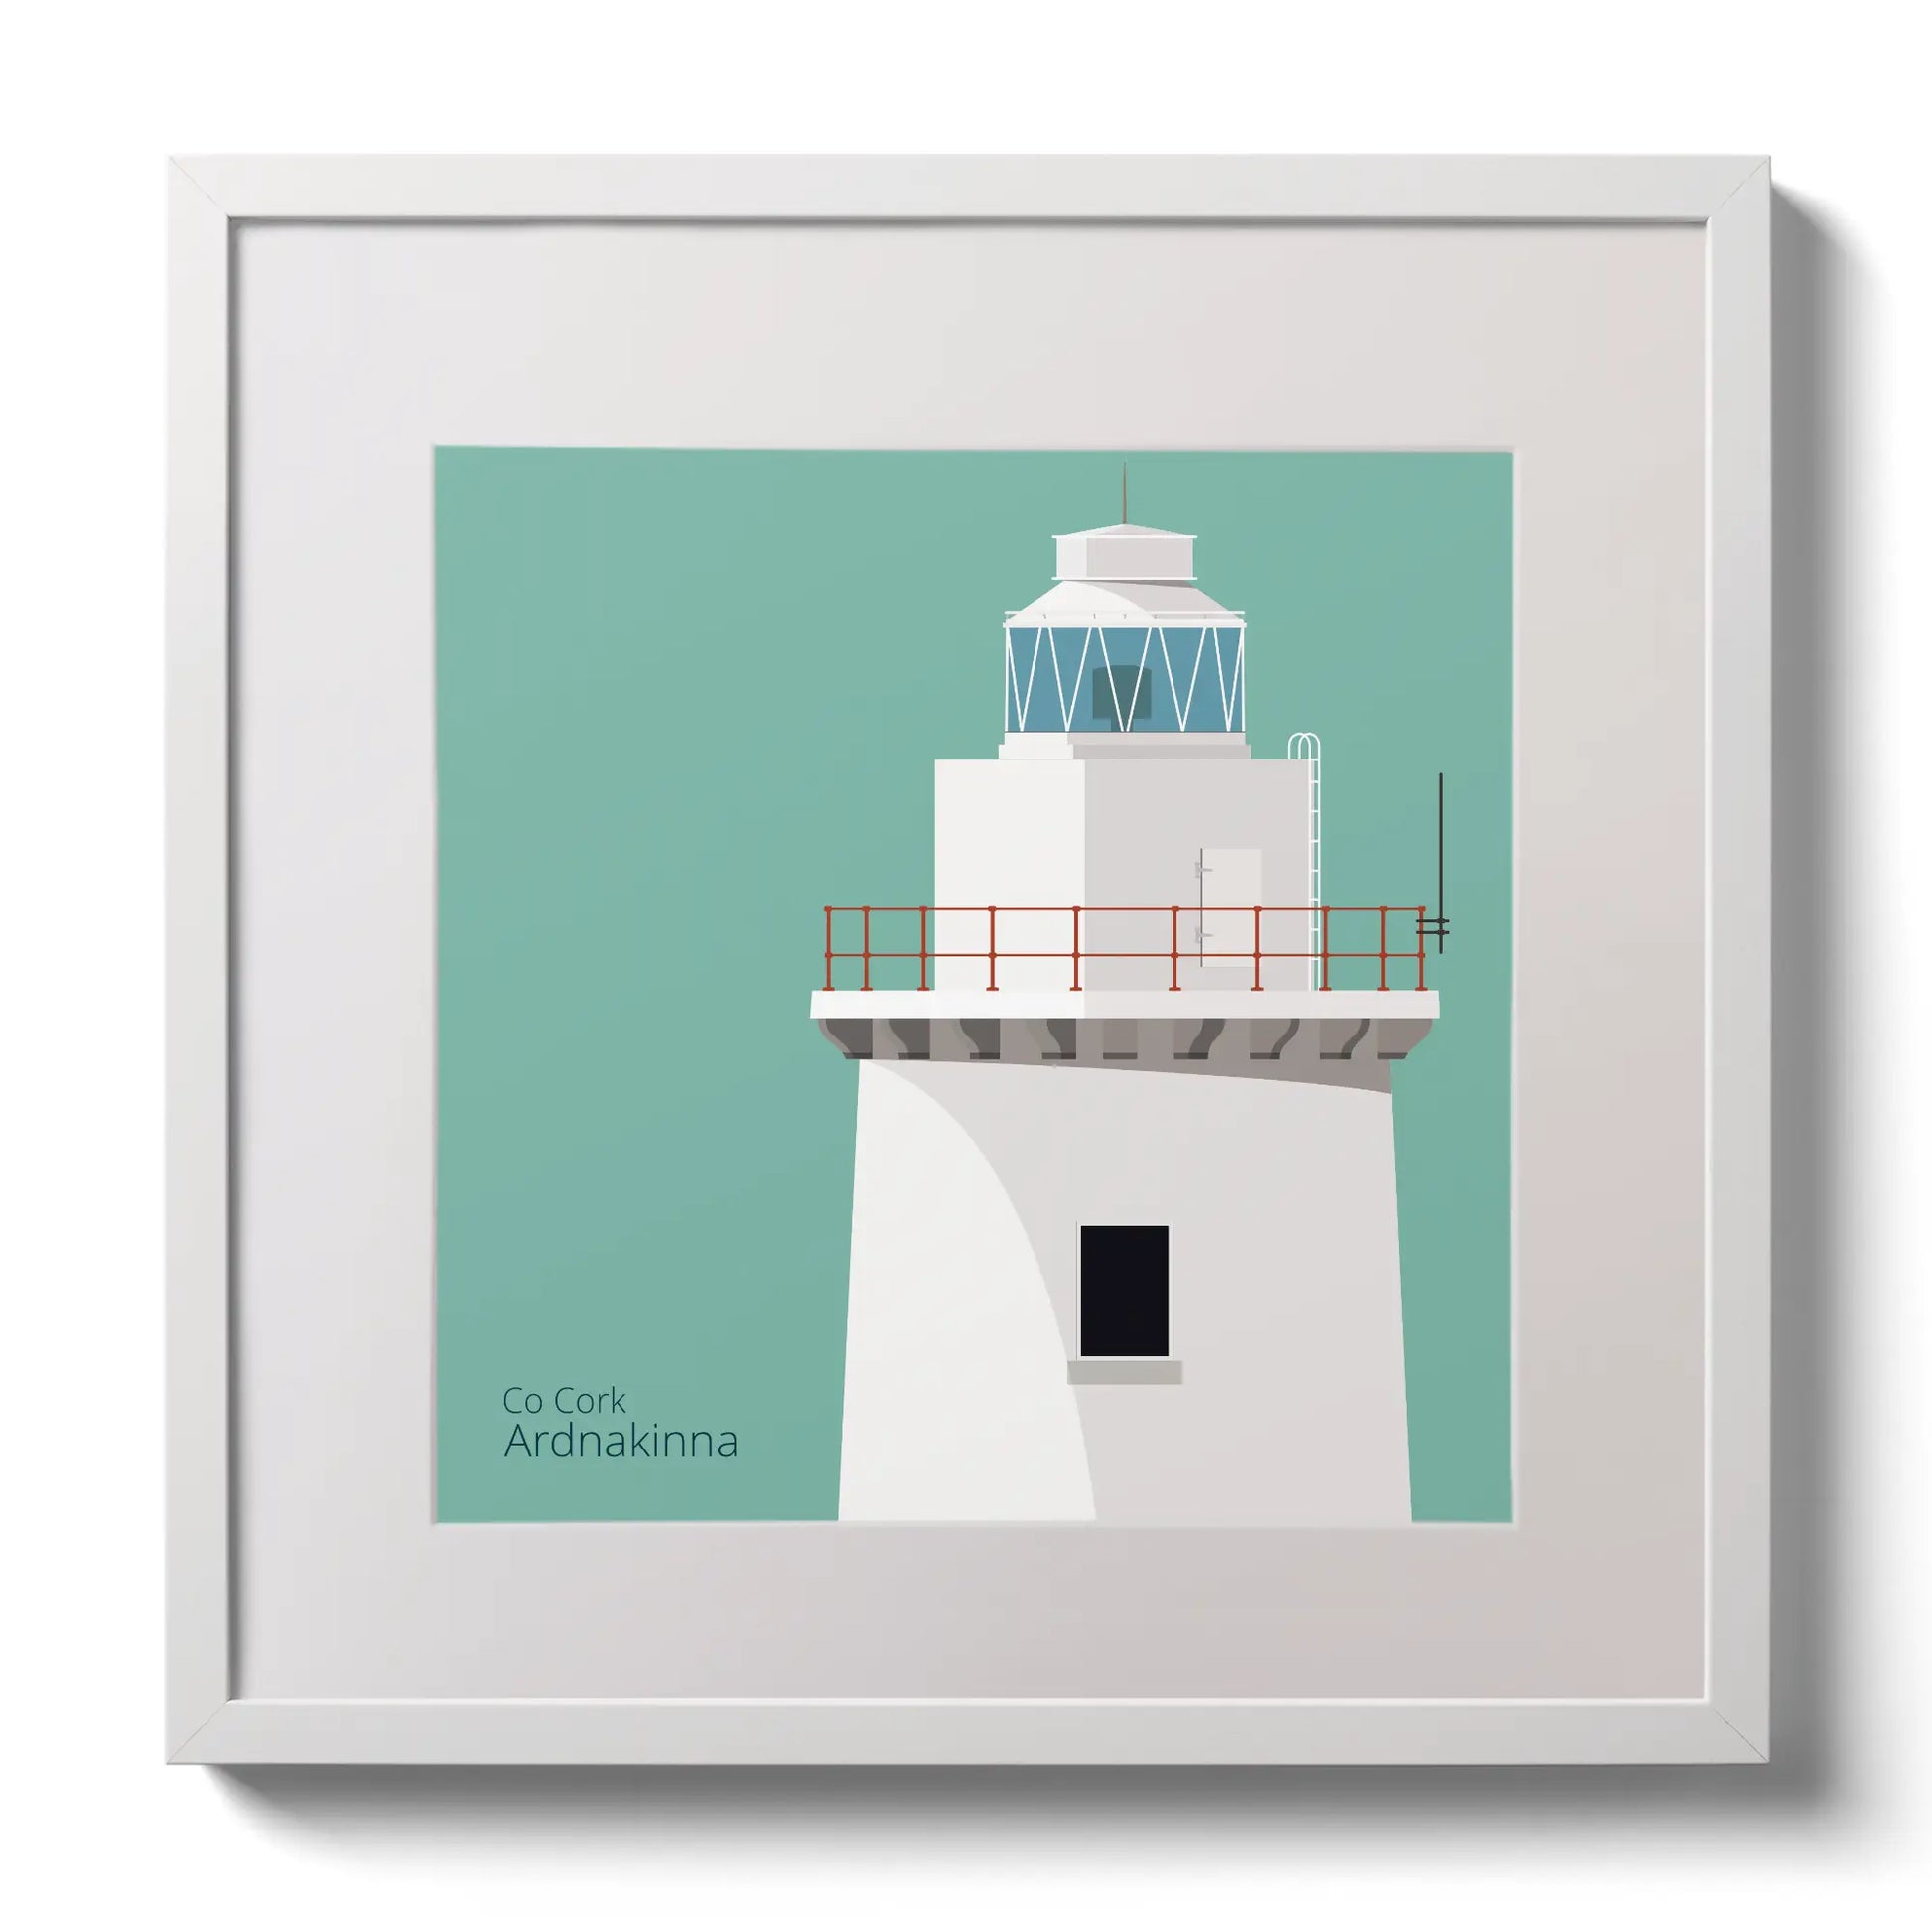 Illustration of Ardnakinna lighthouse on an ocean green background,  in a white square frame measuring 30x30cm.